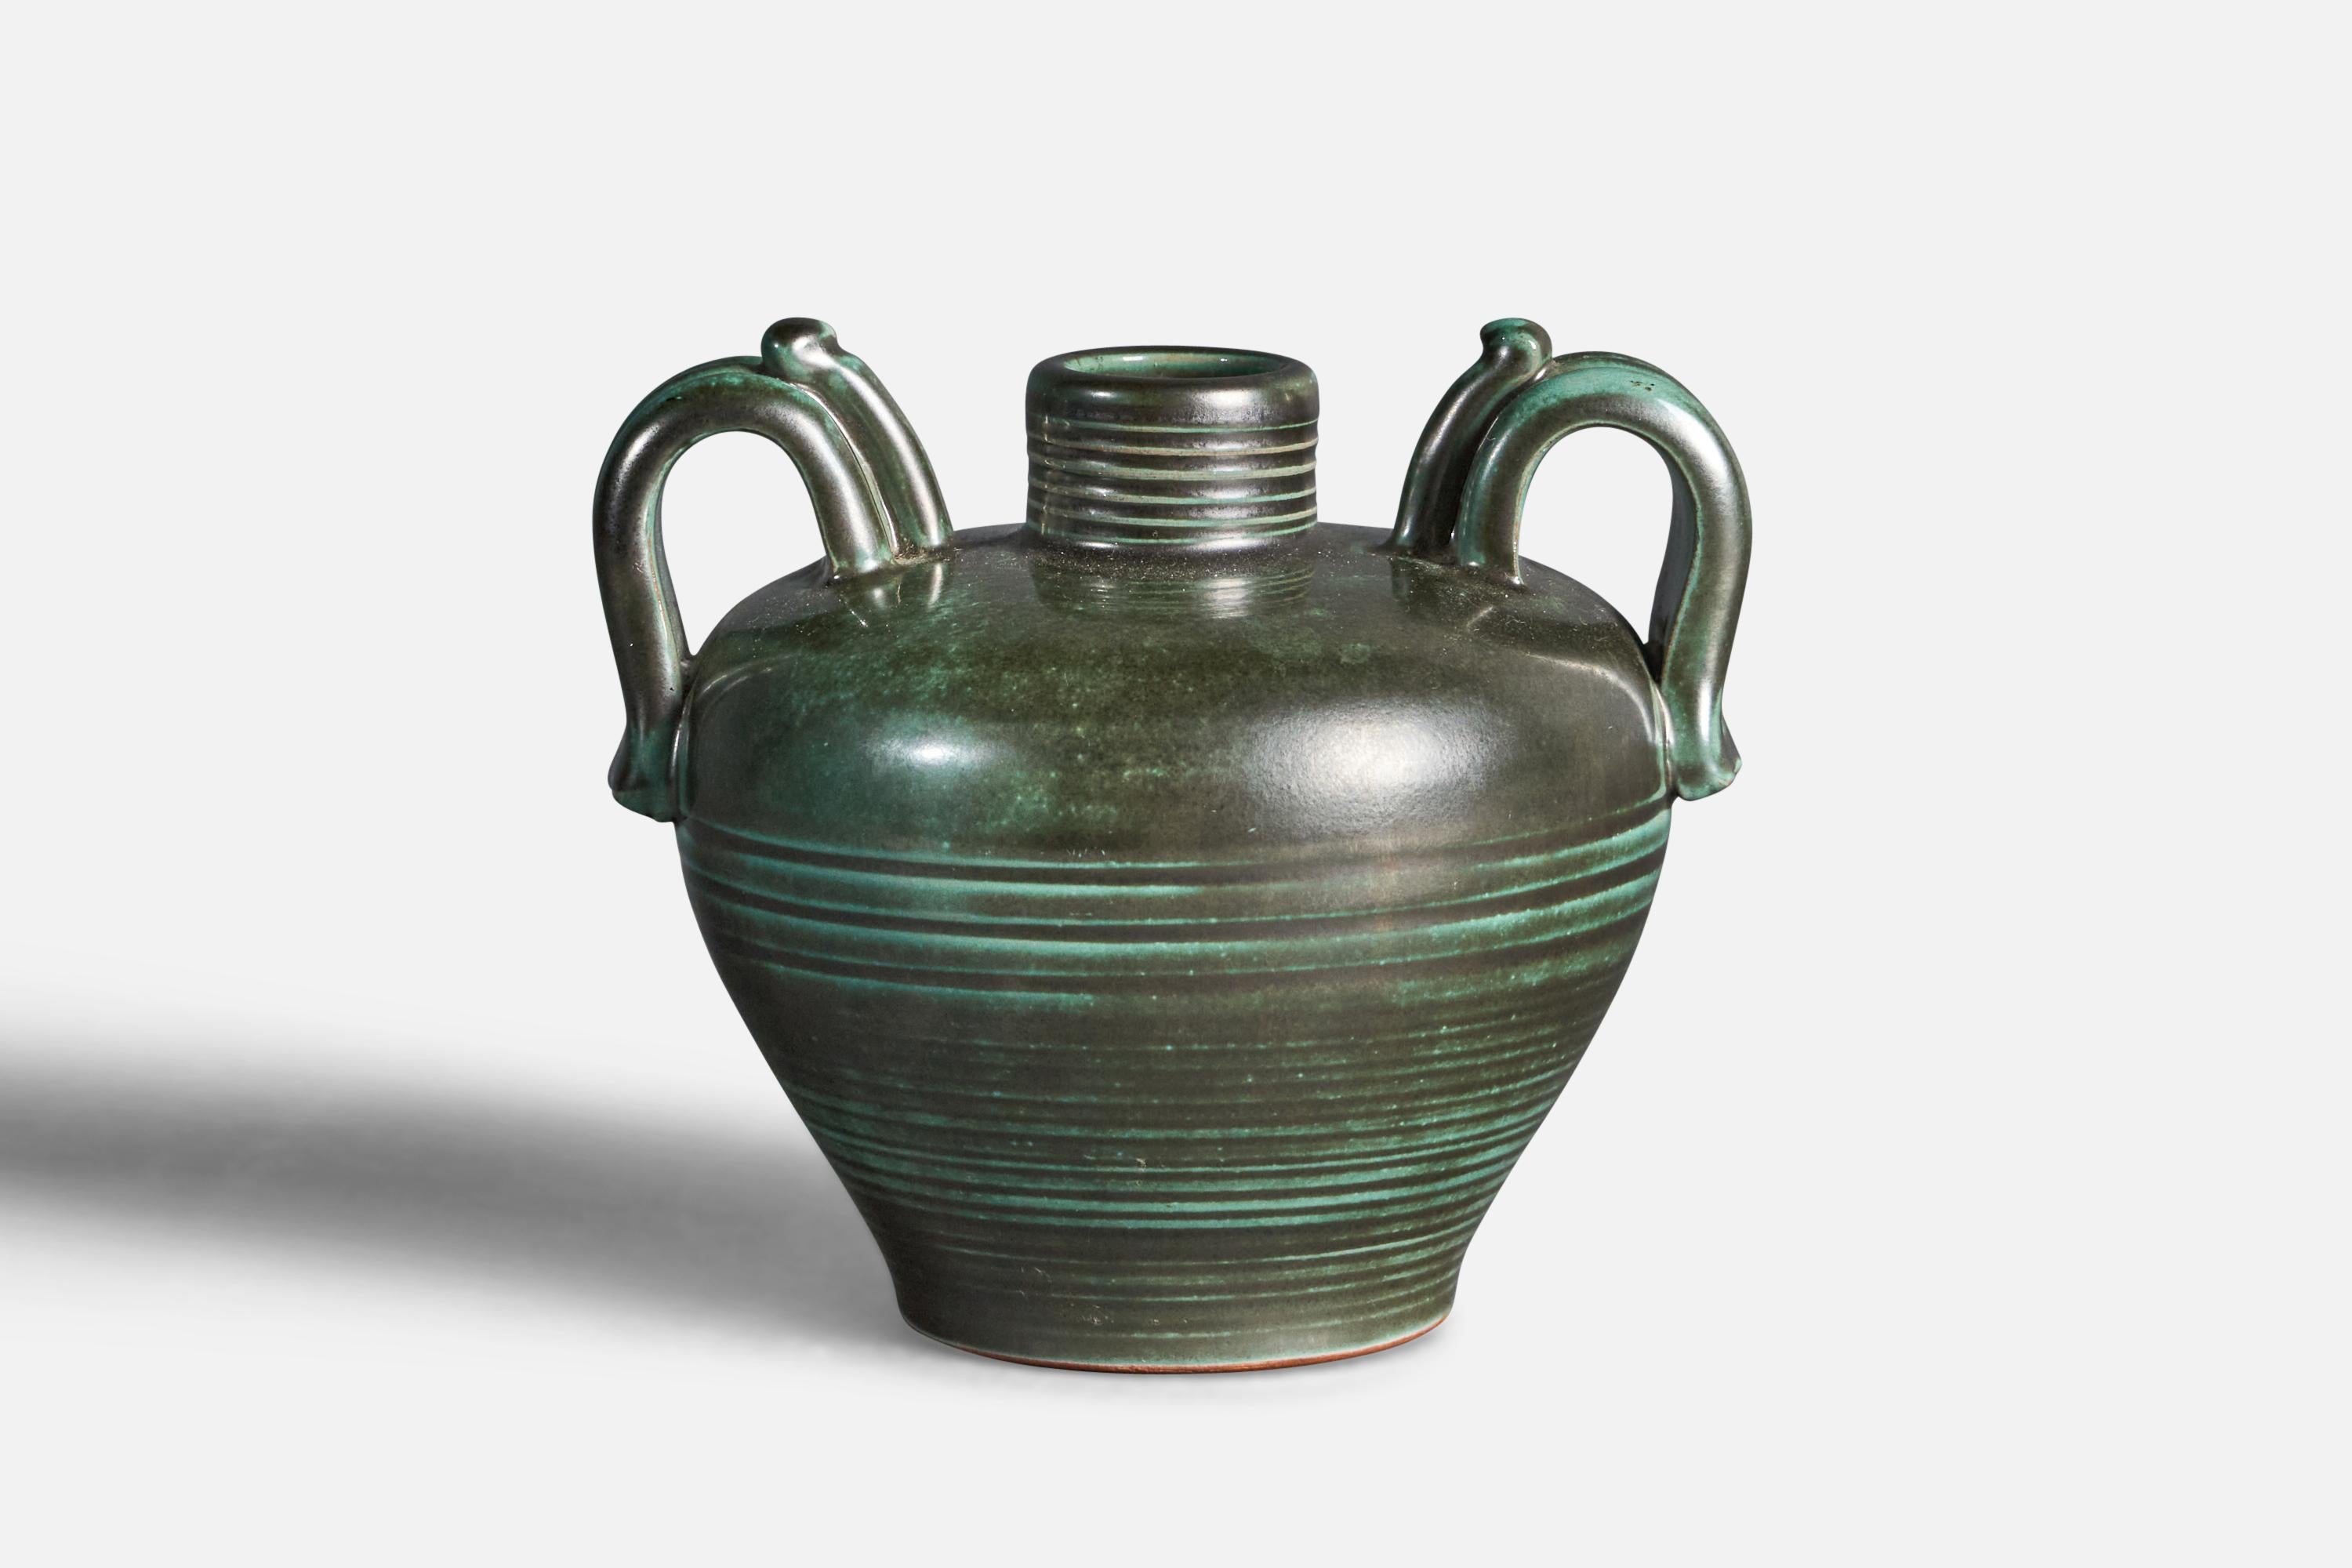 A green-glazed and incised earthenware vase, designed and produced by Upsala Ekeby, Sweden, 1930s.